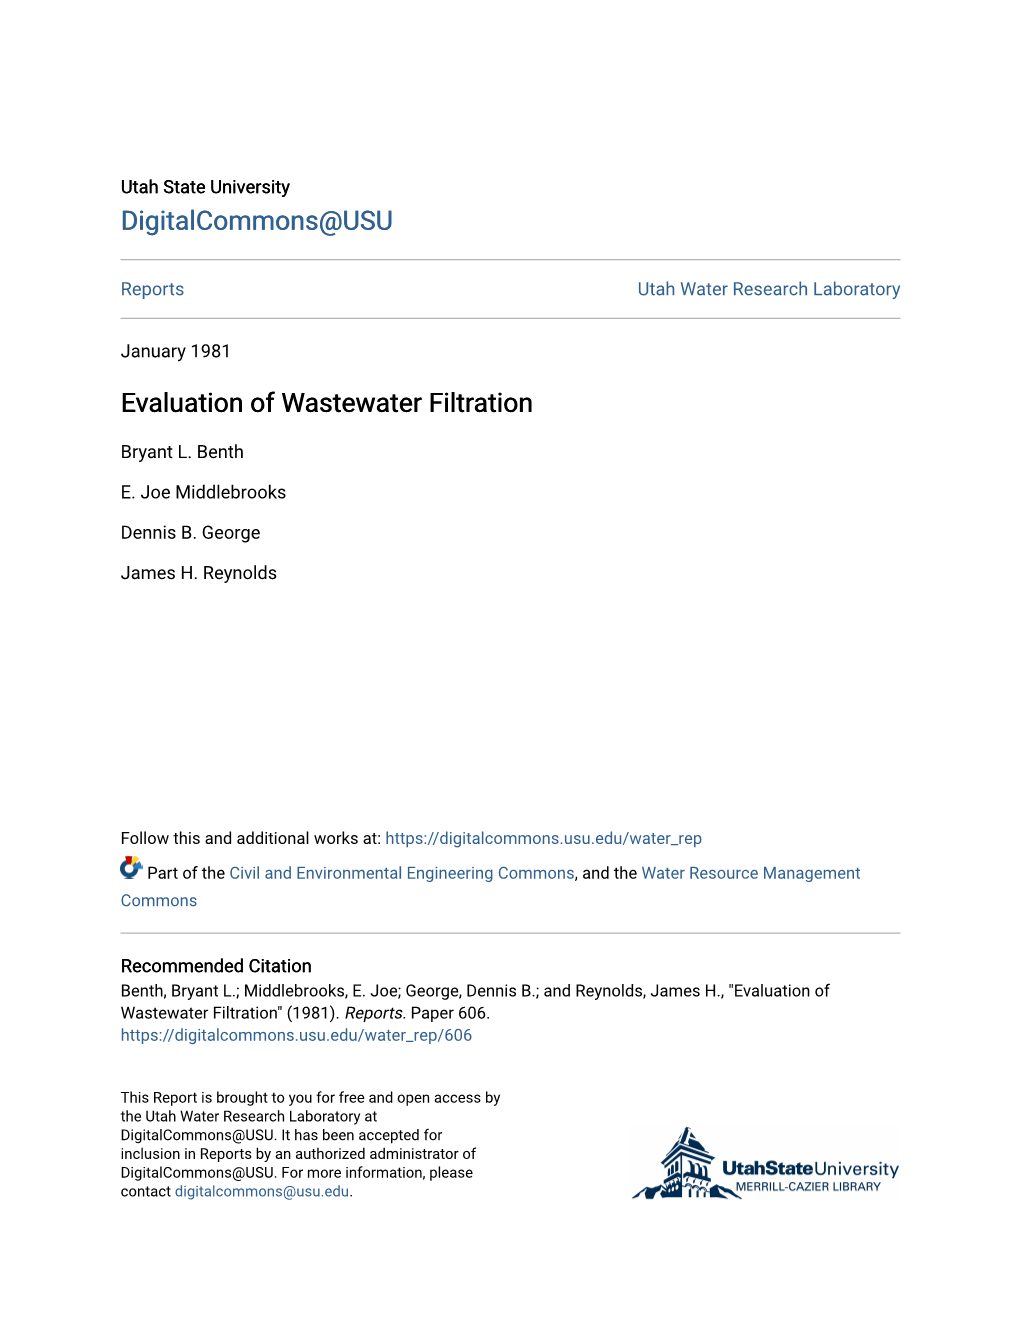 Evaluation of Wastewater Filtration